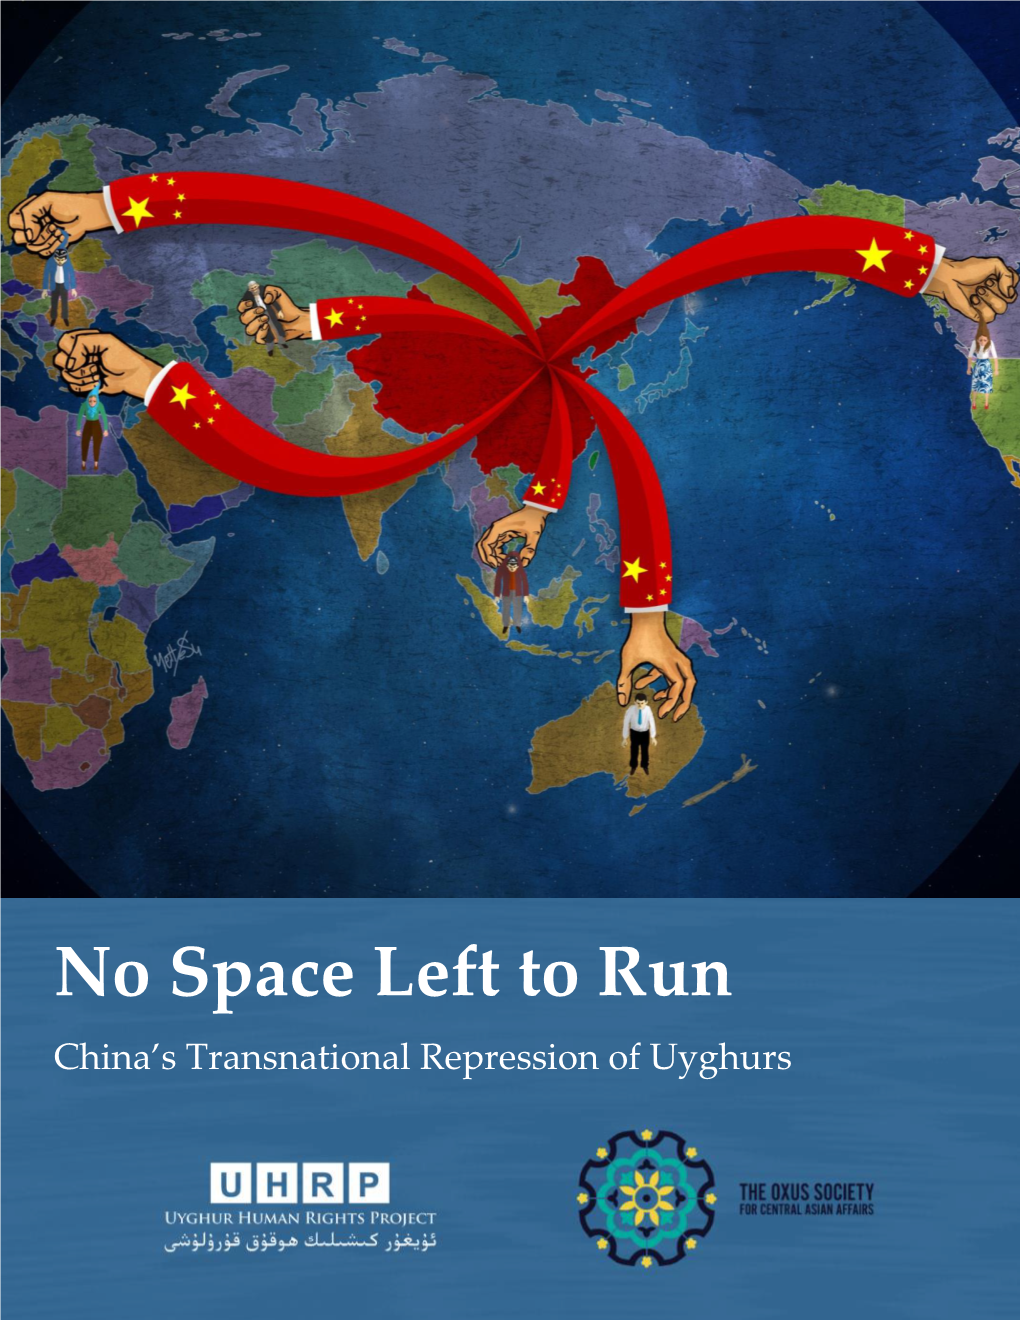 No Space Left to Run: China's Transnational Repression of Uyghurs